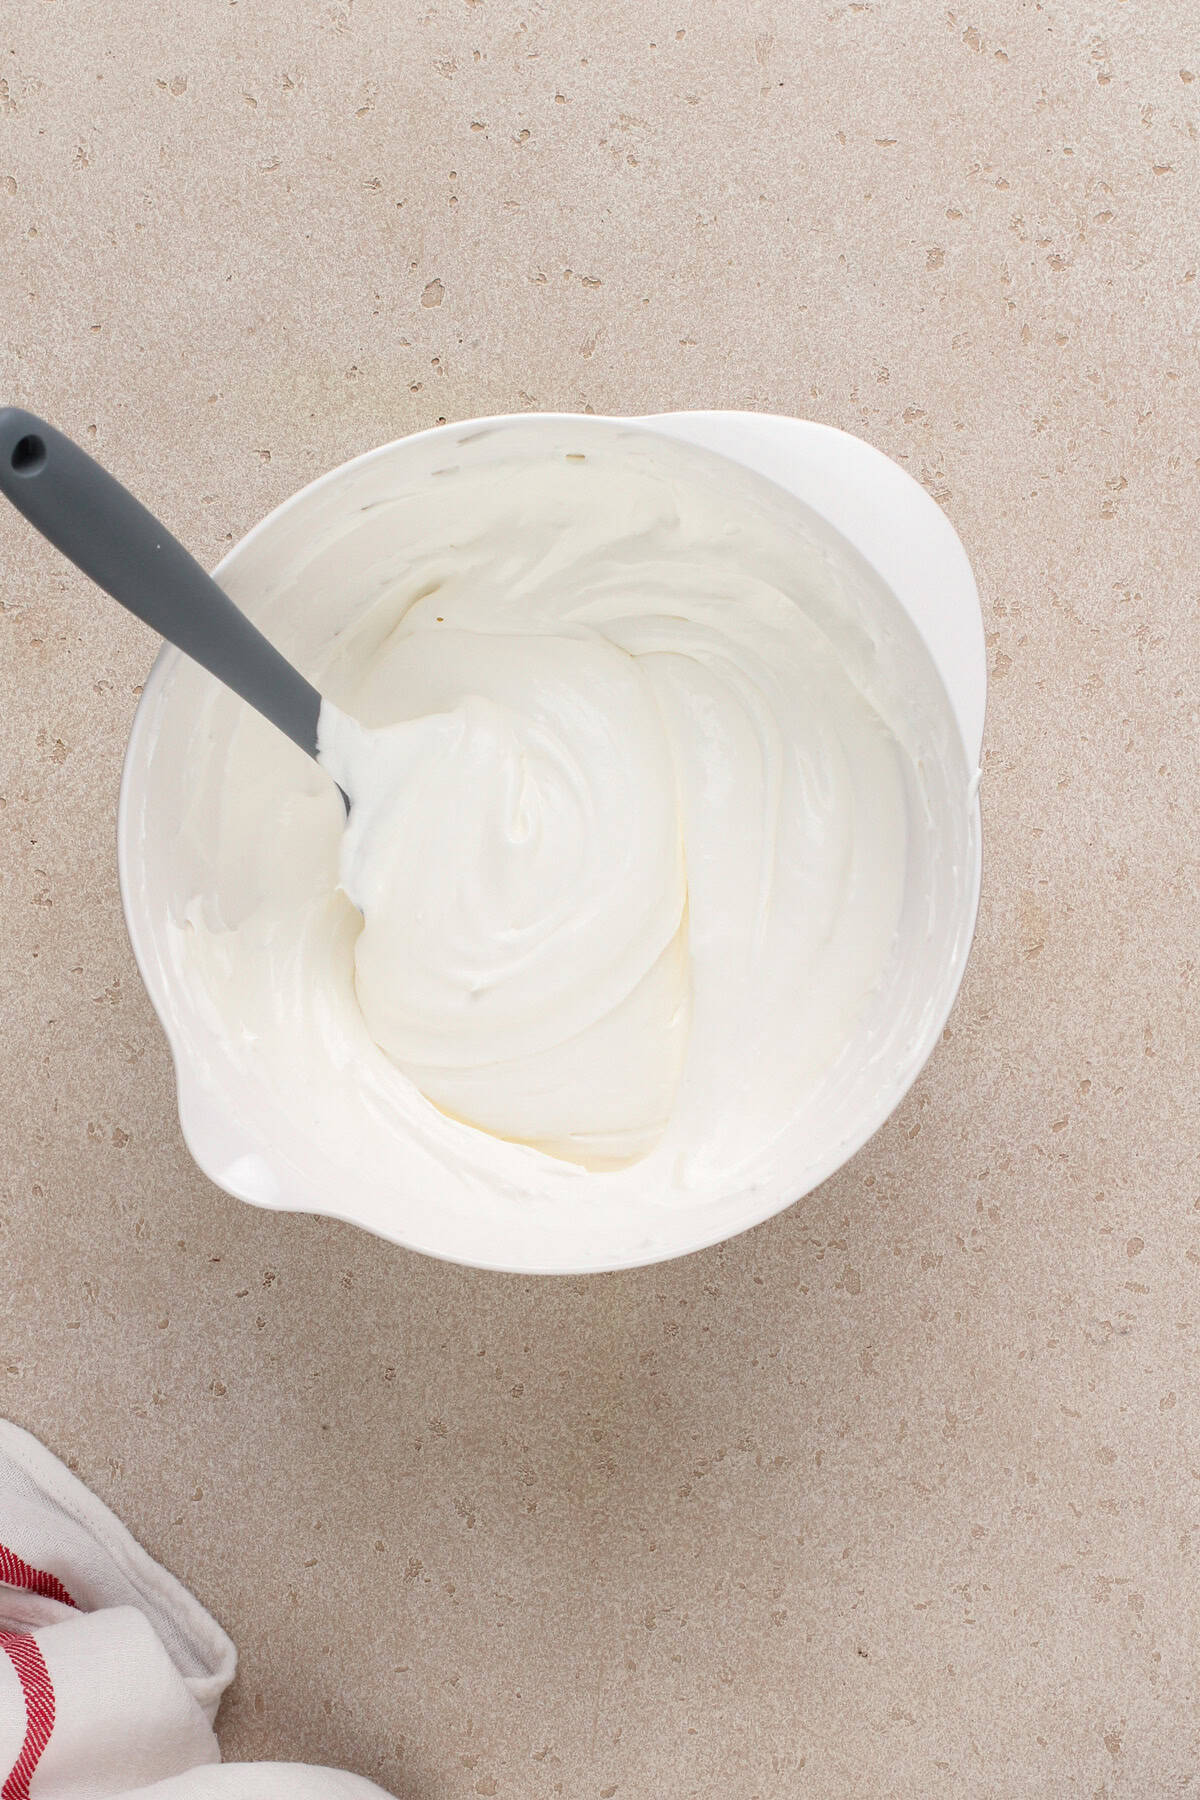 Cool whip and marshmallow fluff mixed together in a white bowl.